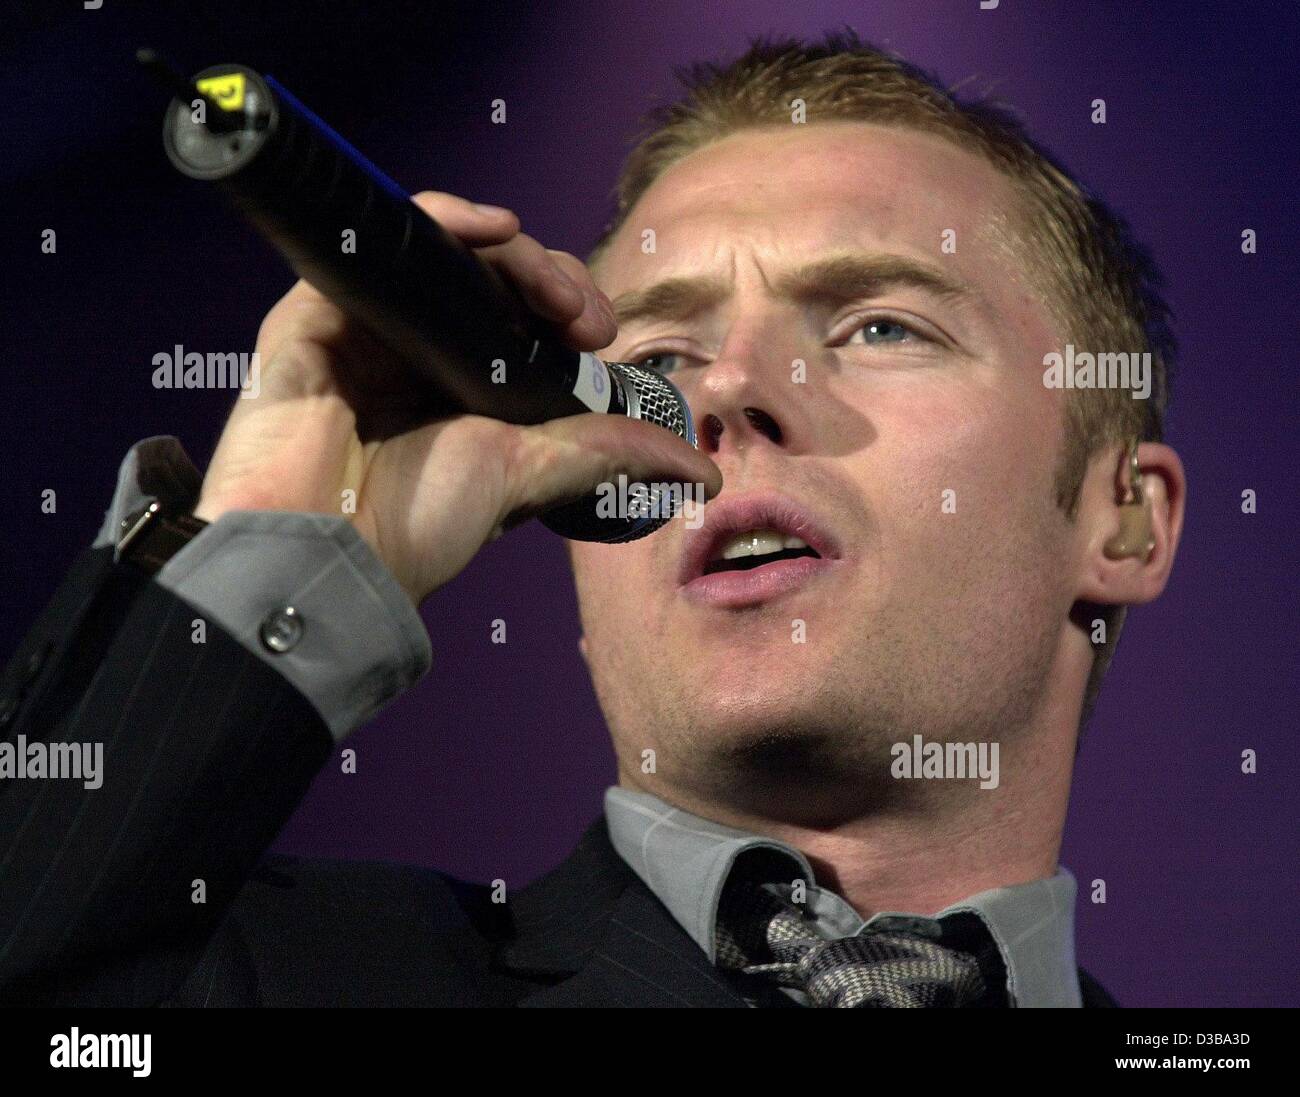 (dpa) - Irish pop singer Ronan Keating ('When You Say Nothing At All', 'Life Is A Rollercoaster') sings during the first concert of his Germany Tour in Munich, 20 October 2002. The former singer of the boy band 'Boyzone' presented his second solo album entitled 'Destination', which includes the hit  Stock Photo